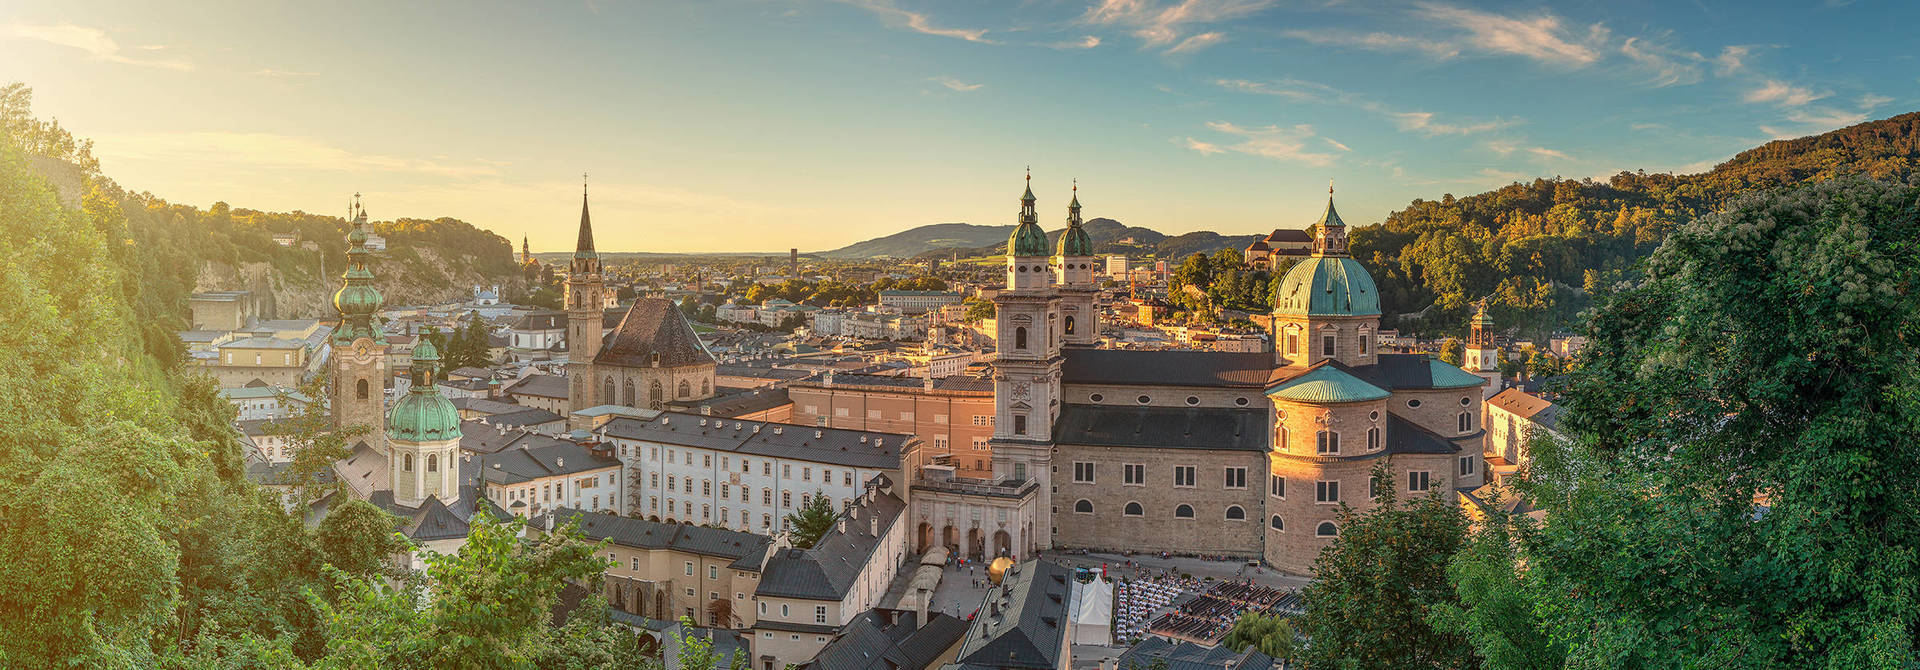 Explore the city on foot - Hyperion Hotel Salzburg